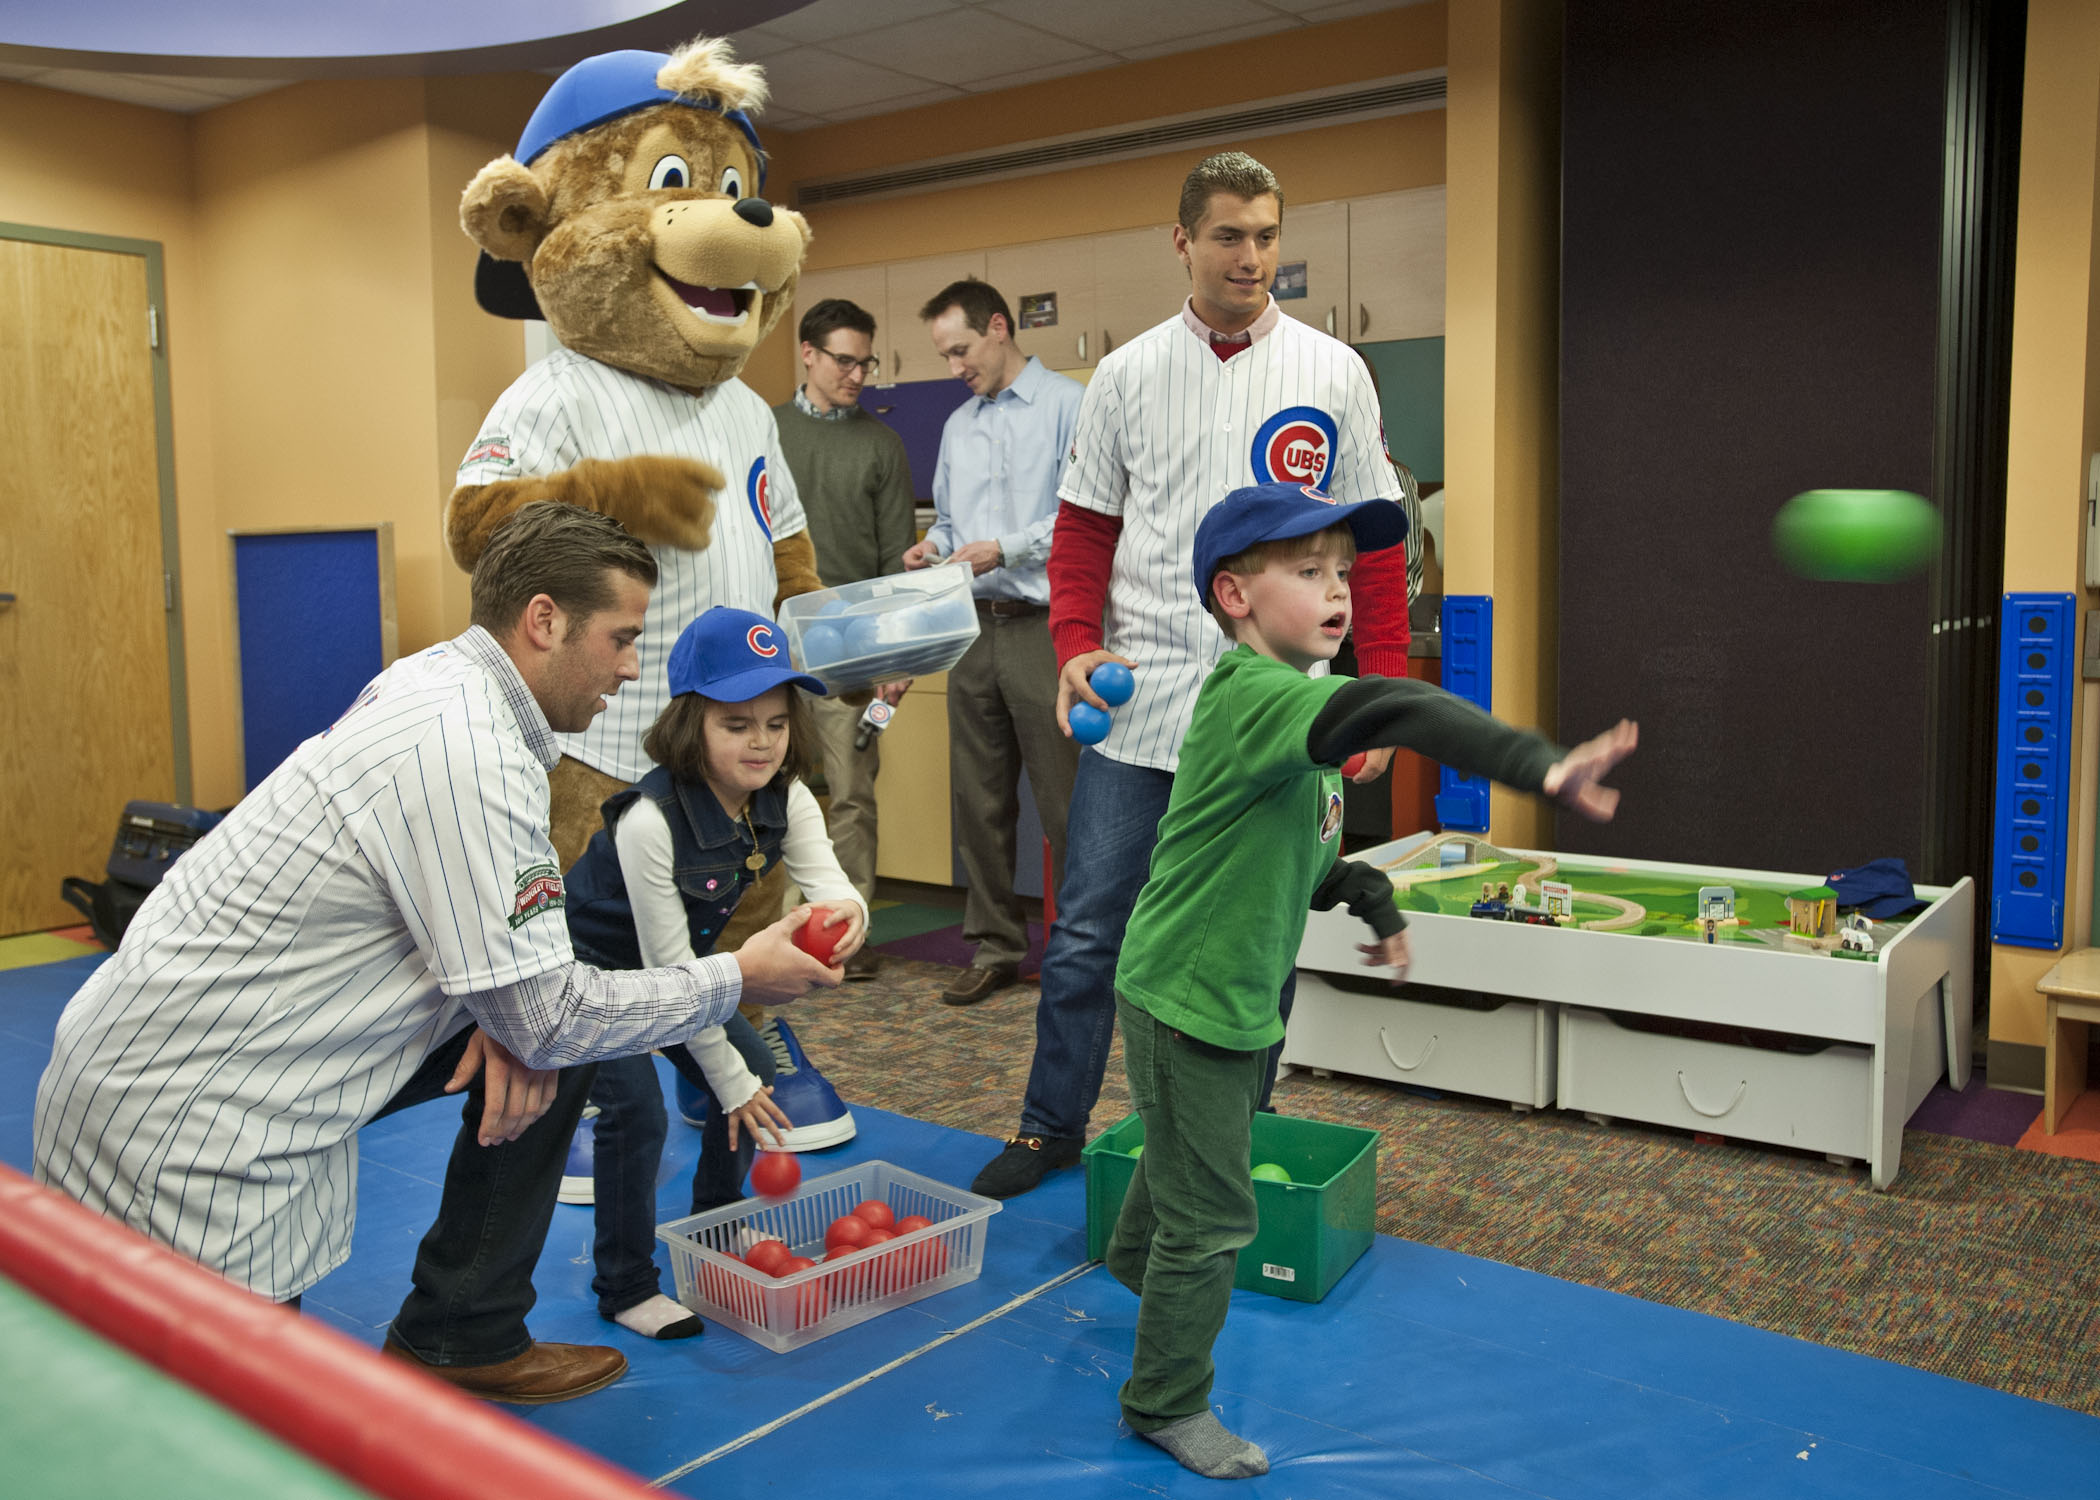 The Chicago Cubs’ new mascot, Clark, and prospects Mike Olt and Albert Almora play a ball toss game with the kids.